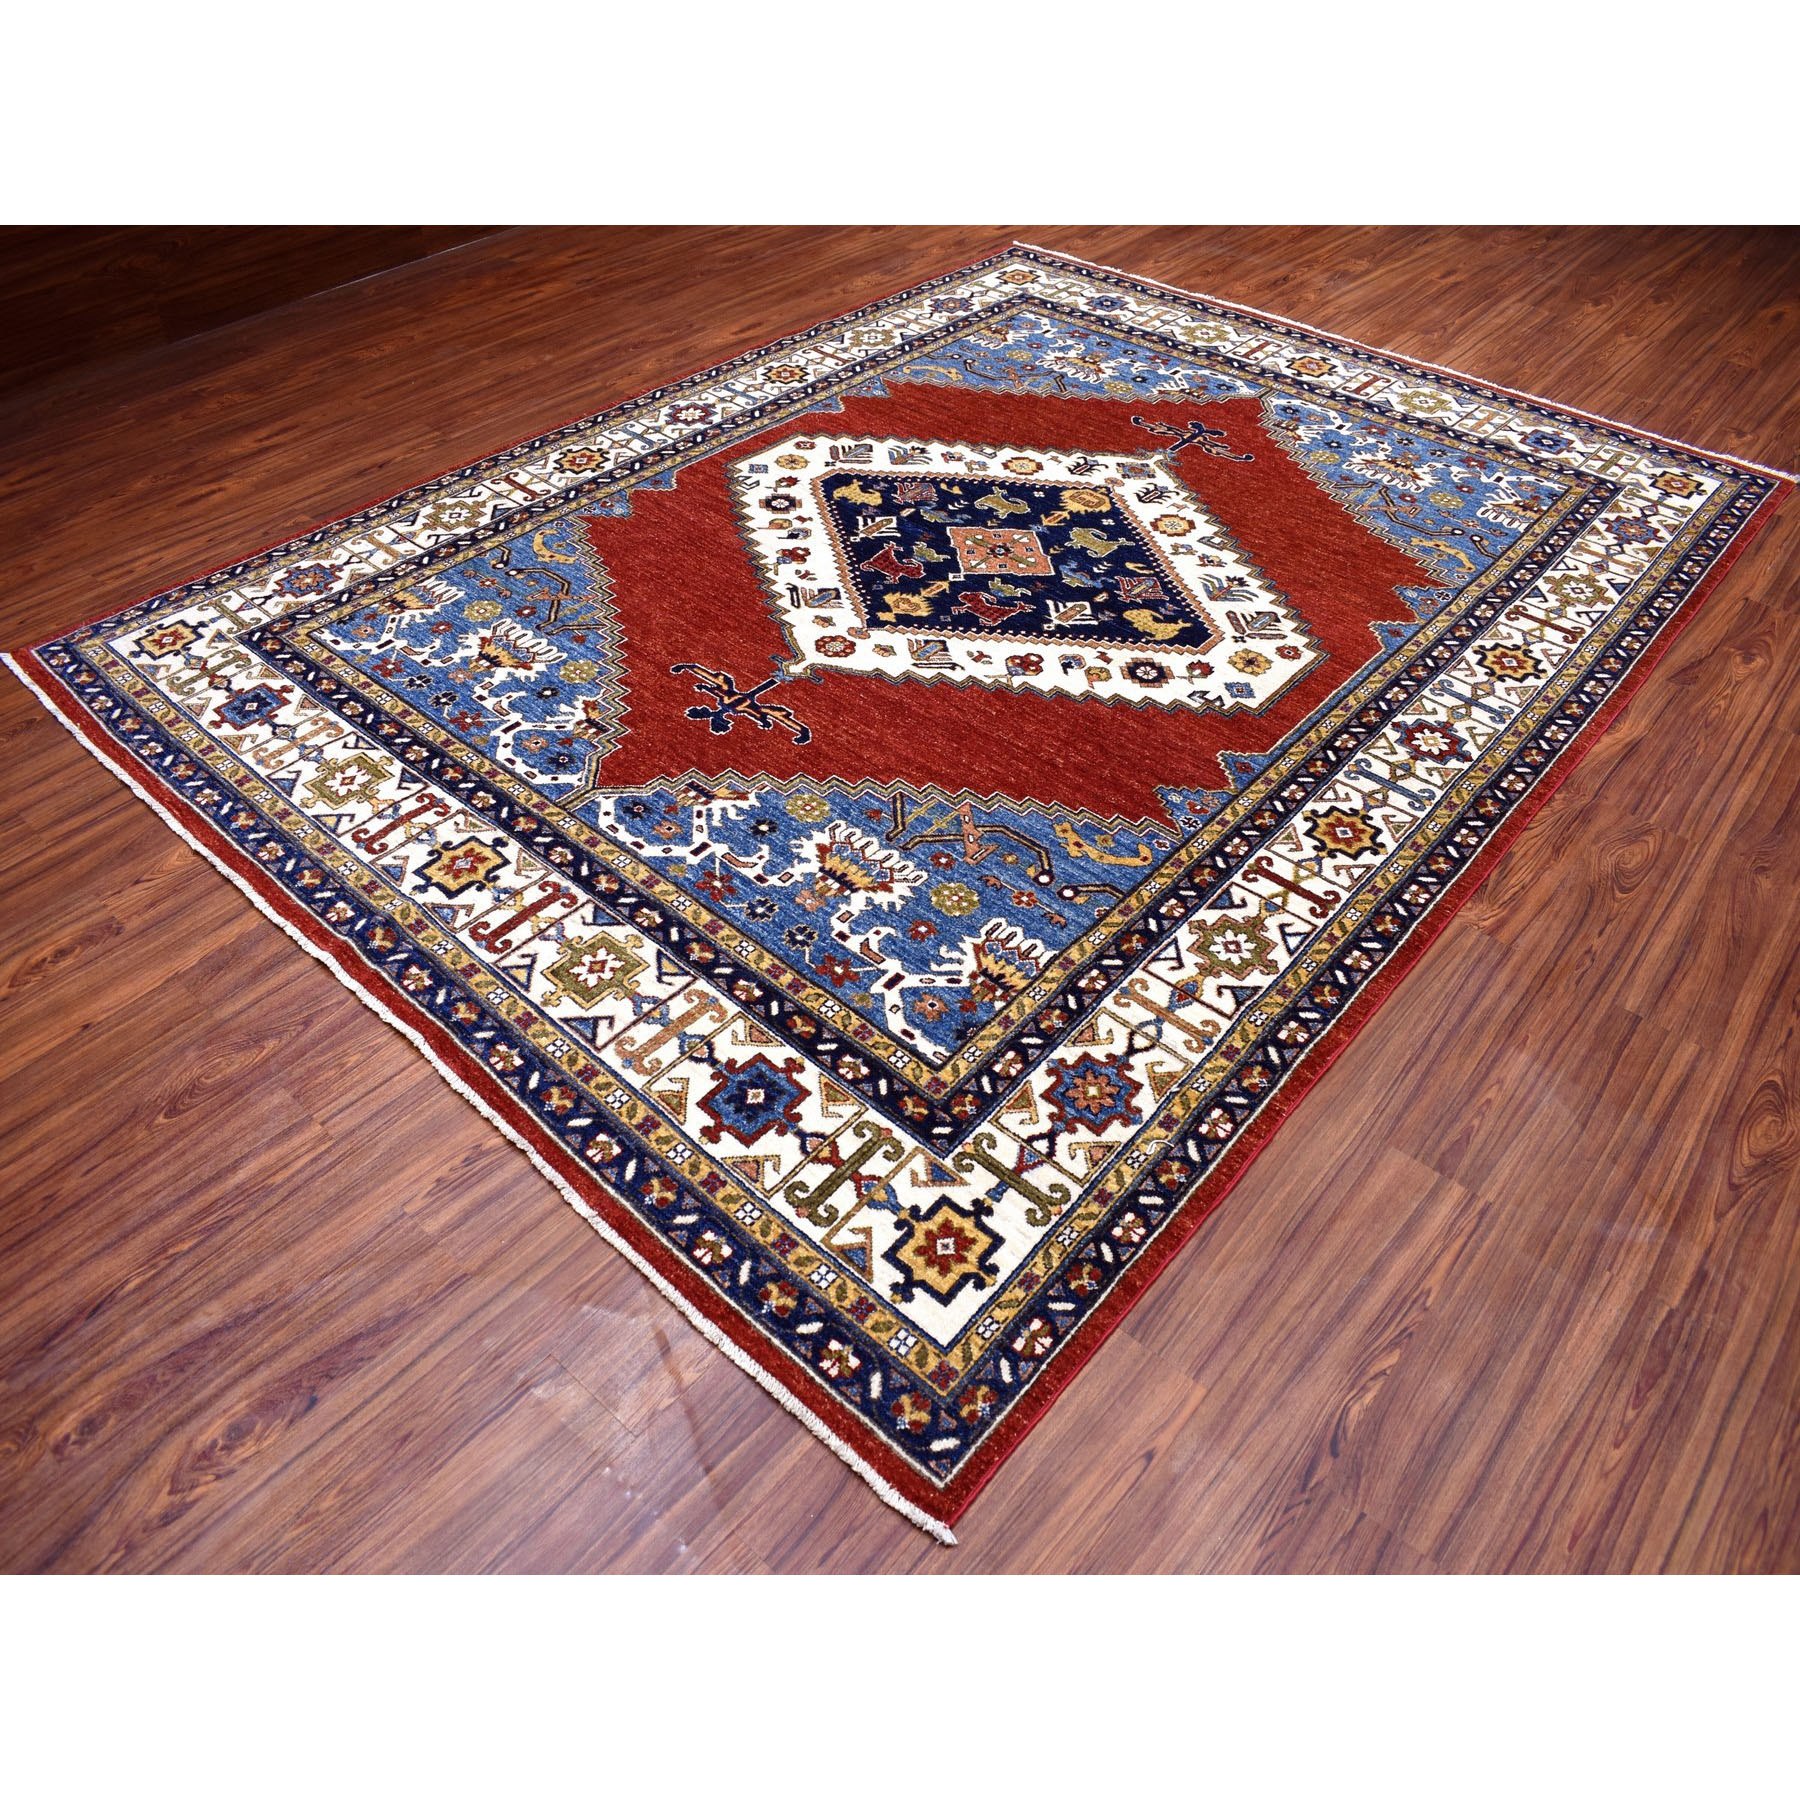 8-1 x10-8  Red Peshawar With Serapi Heriz Design Natural Dyes Hand Knotted Pure Wool Oriental Rug 